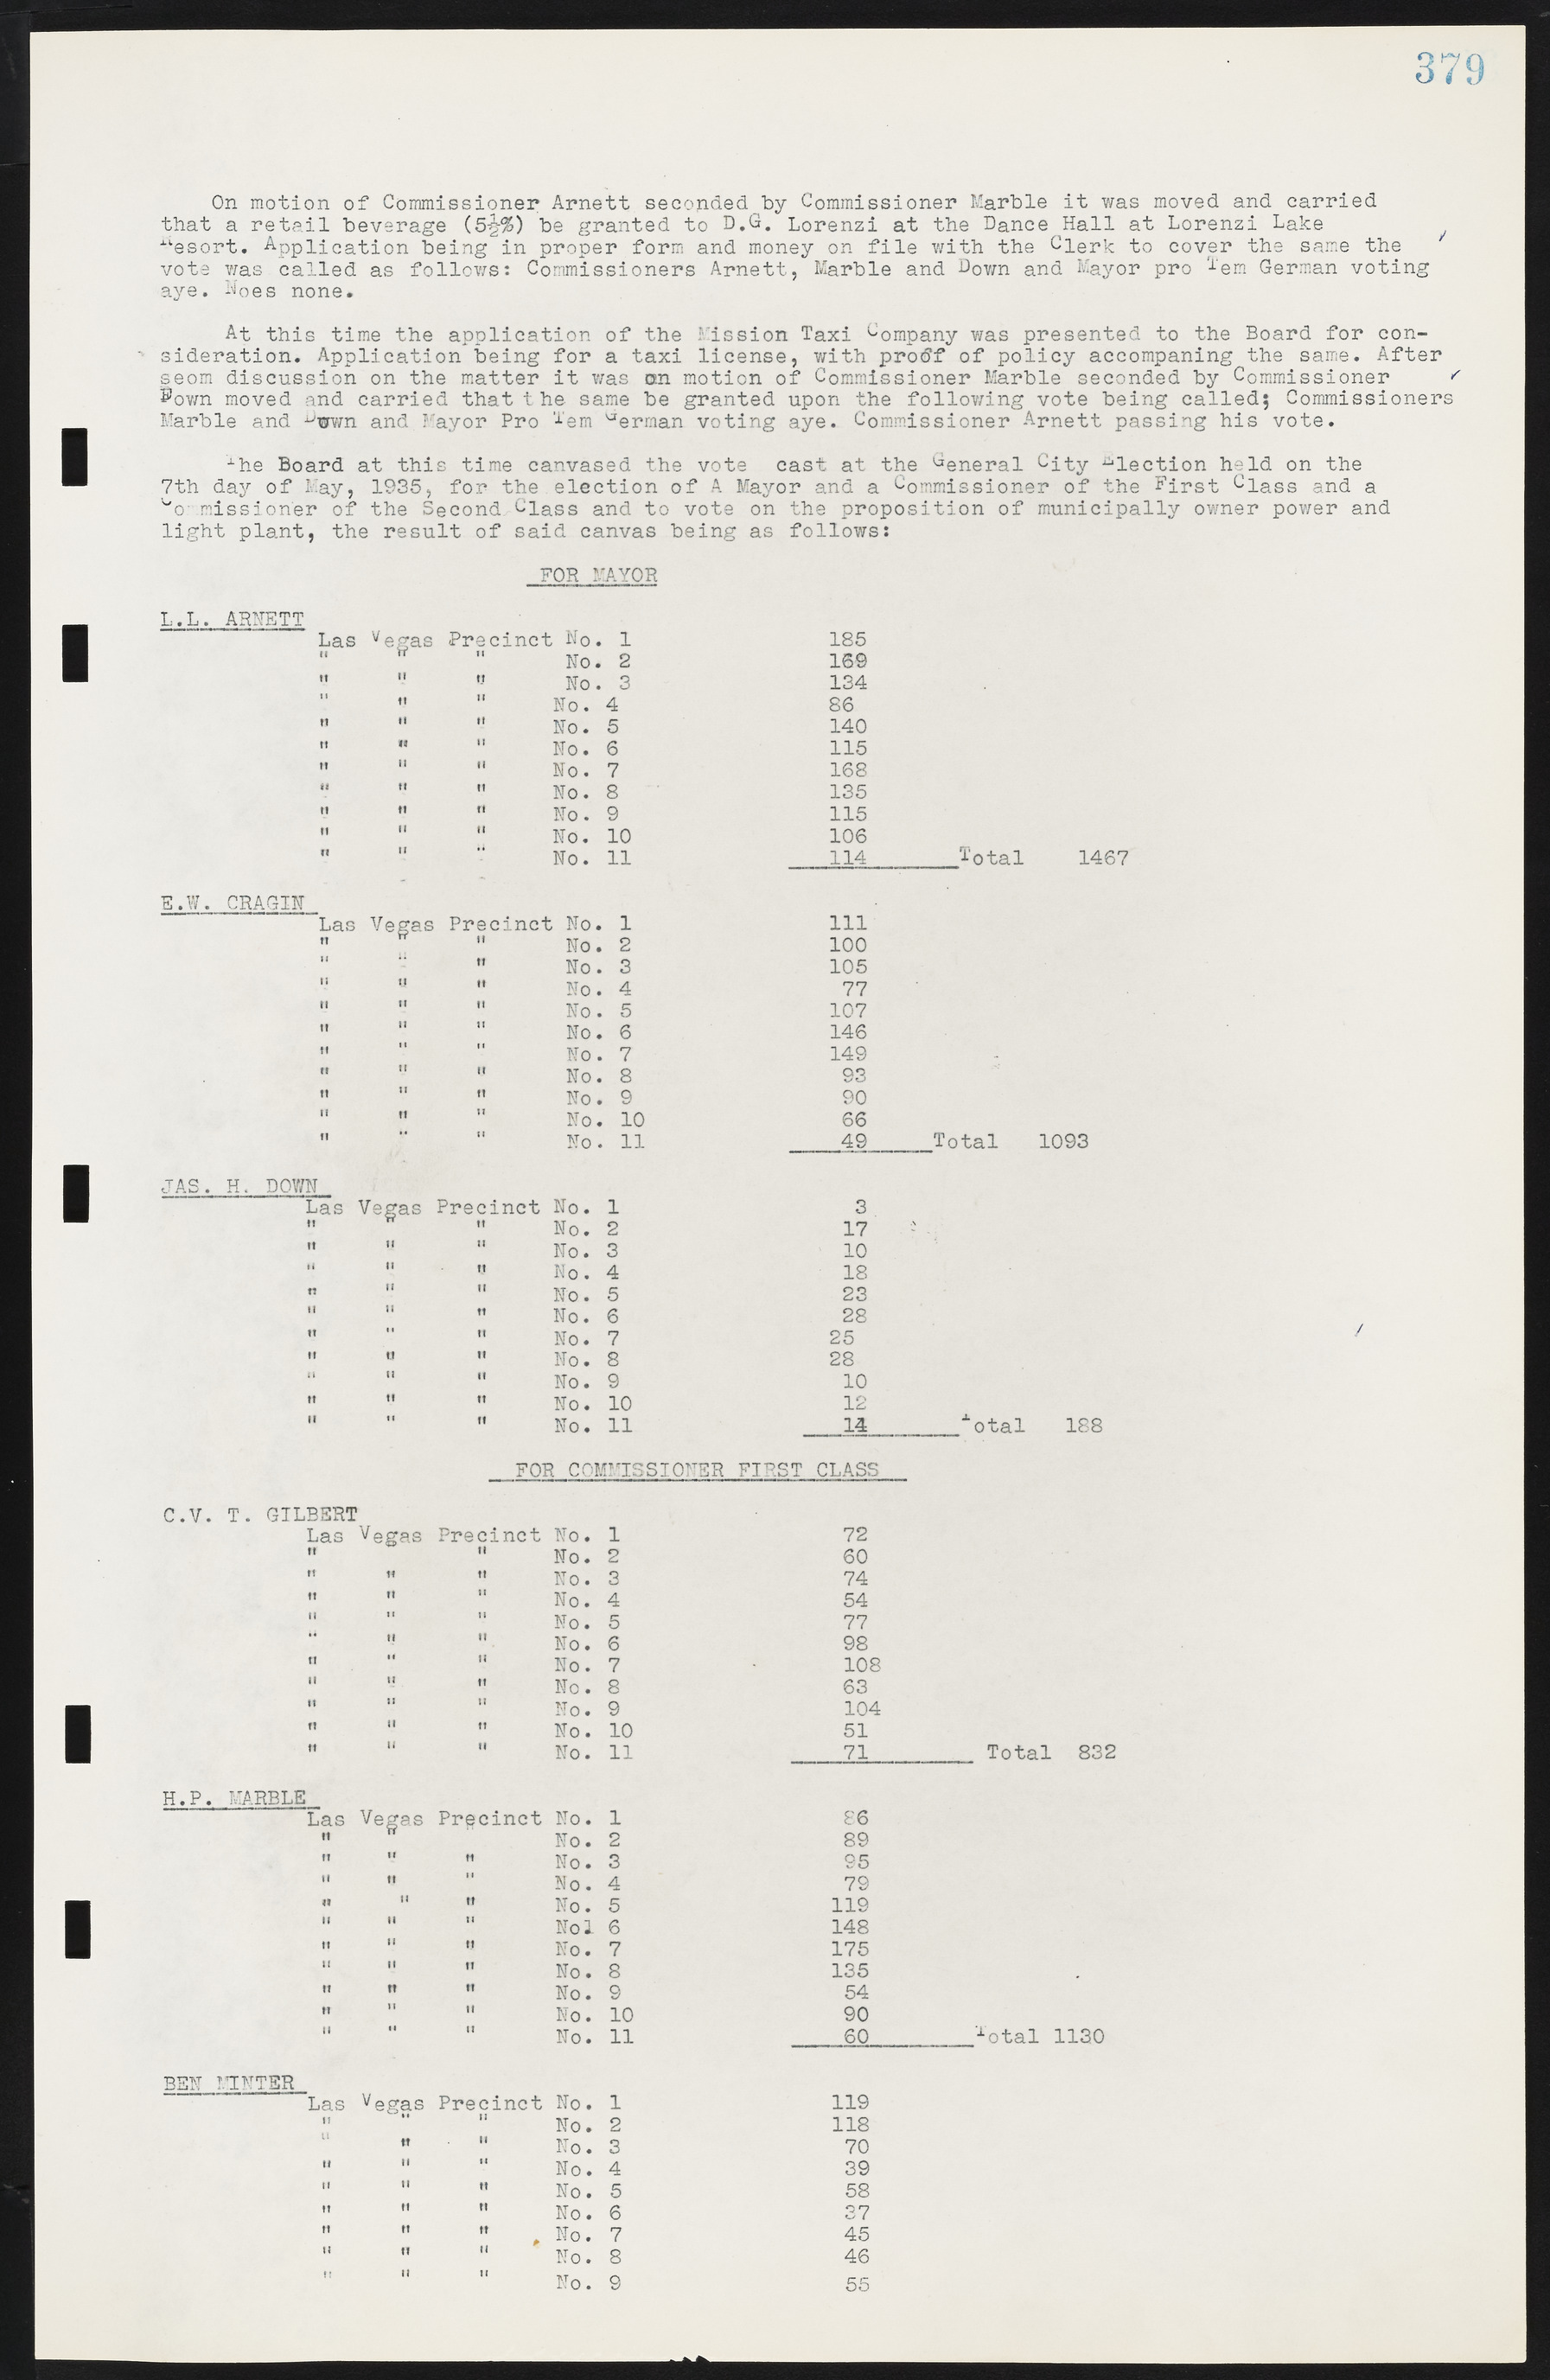 Las Vegas City Commission Minutes, May 14, 1929 to February 11, 1937, lvc000003-386